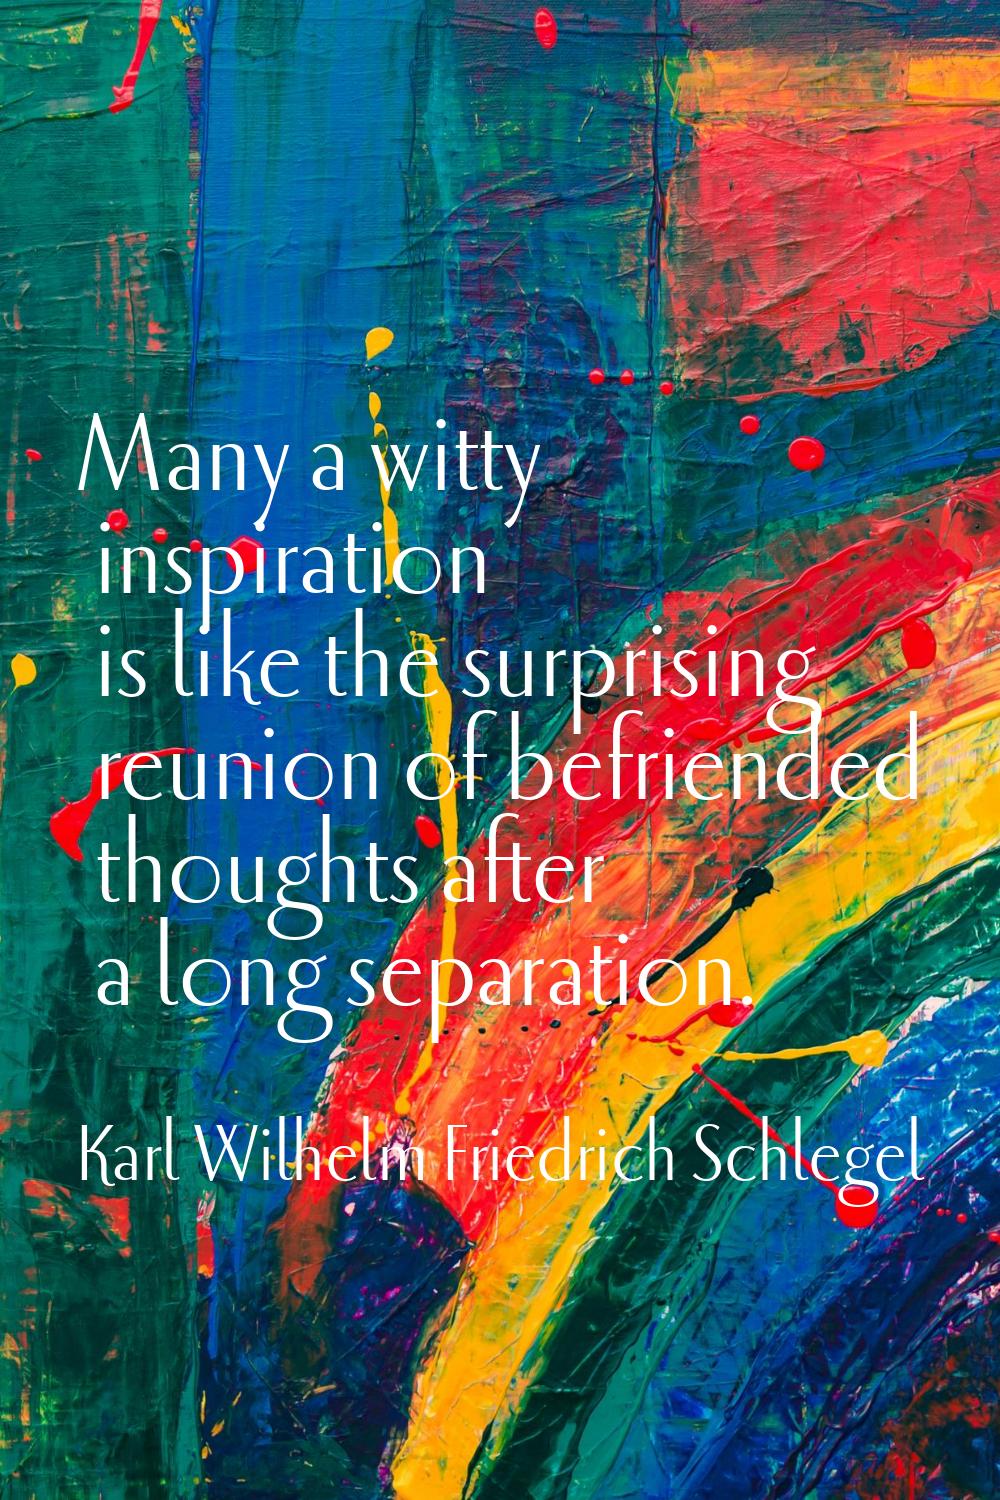 Many a witty inspiration is like the surprising reunion of befriended thoughts after a long separat